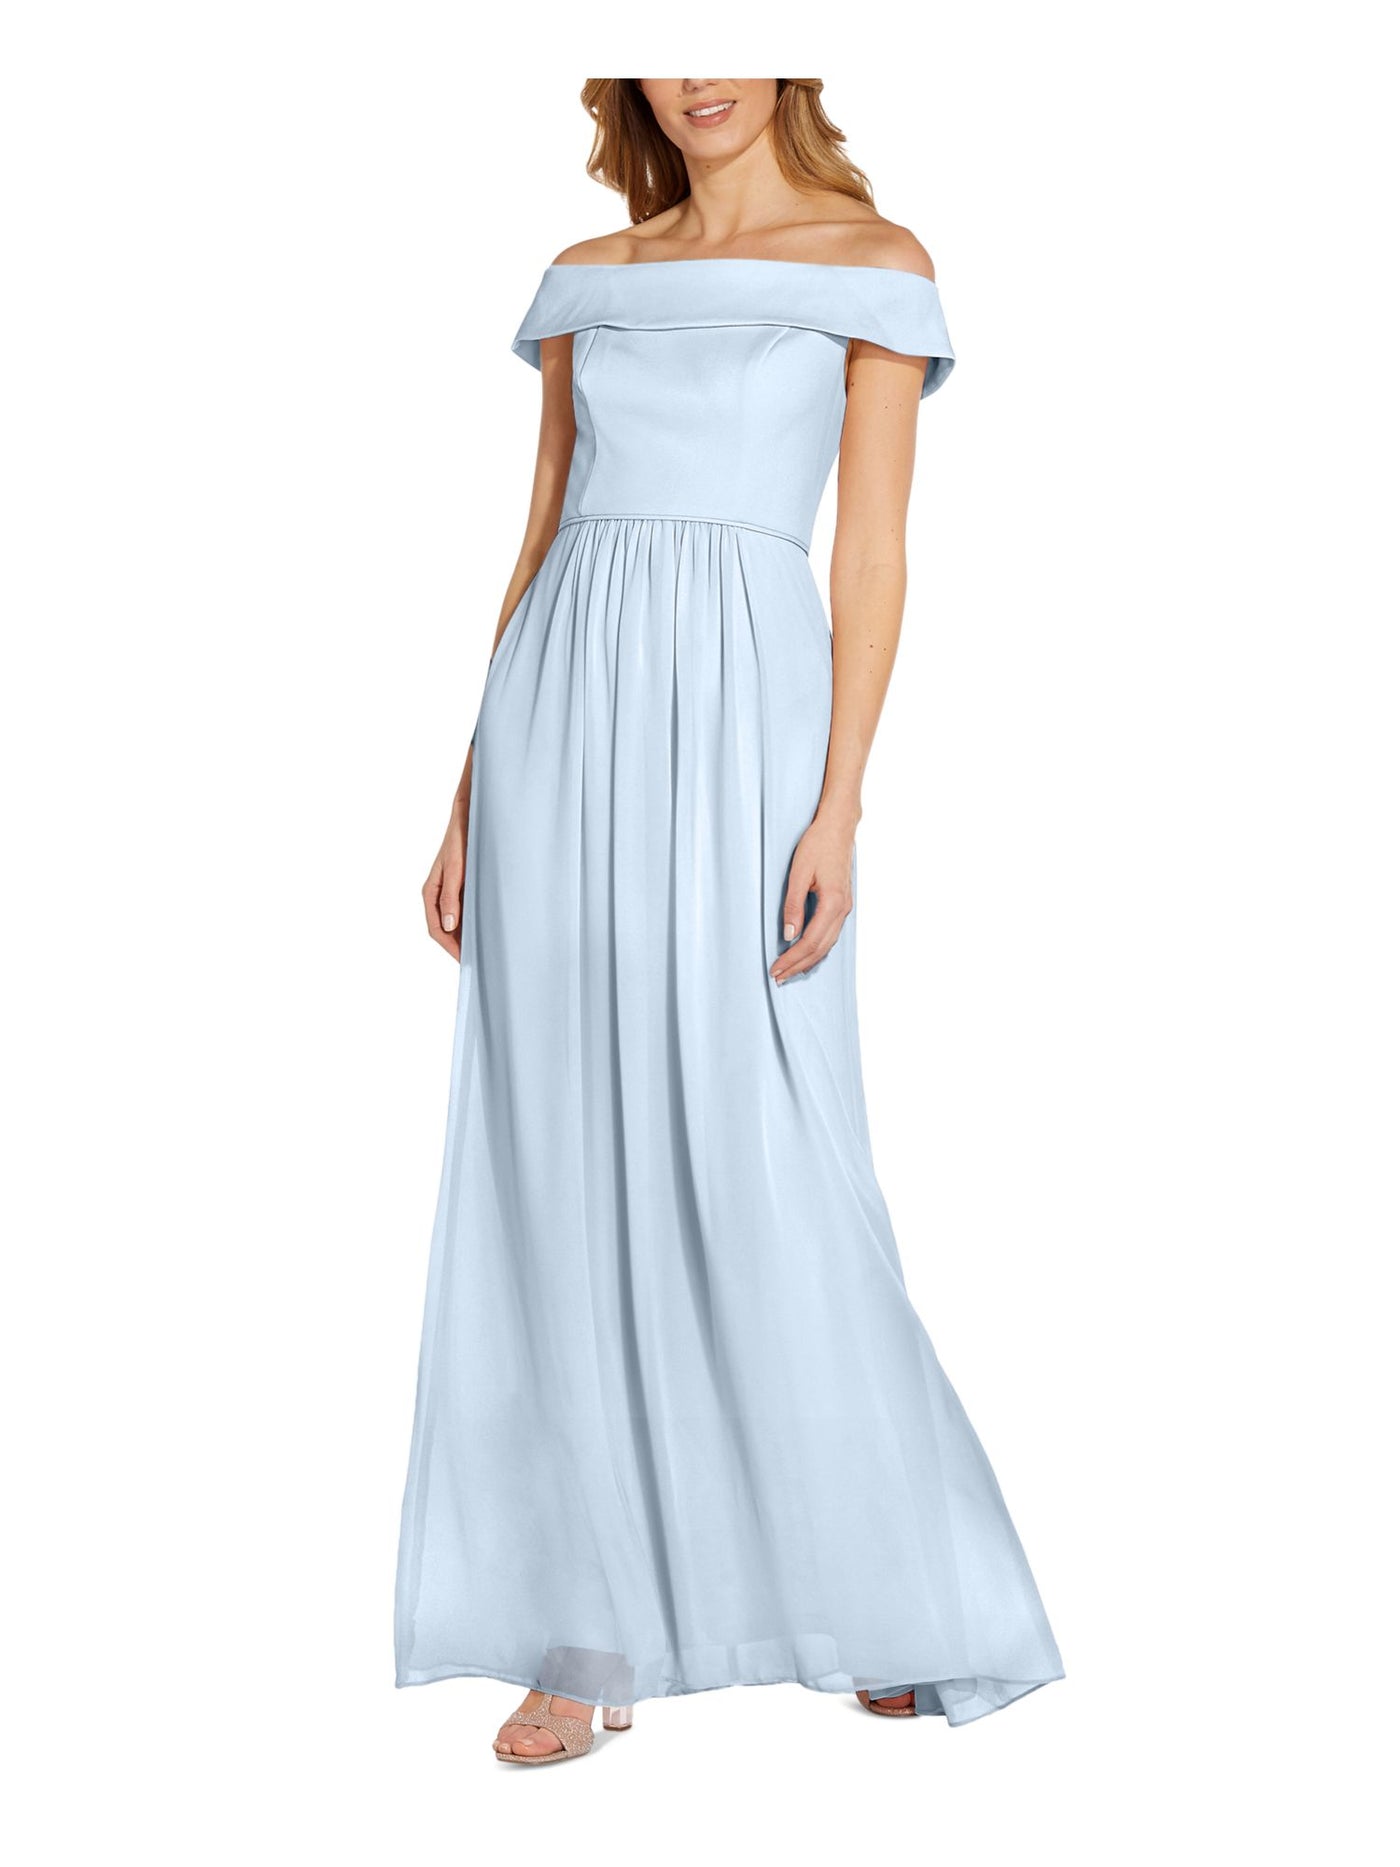 ADRIANNA PAPELL Womens Light Blue Pleated Zippered Chiffon Short Sleeve Off Shoulder Maxi Formal Fit + Flare Dress 2